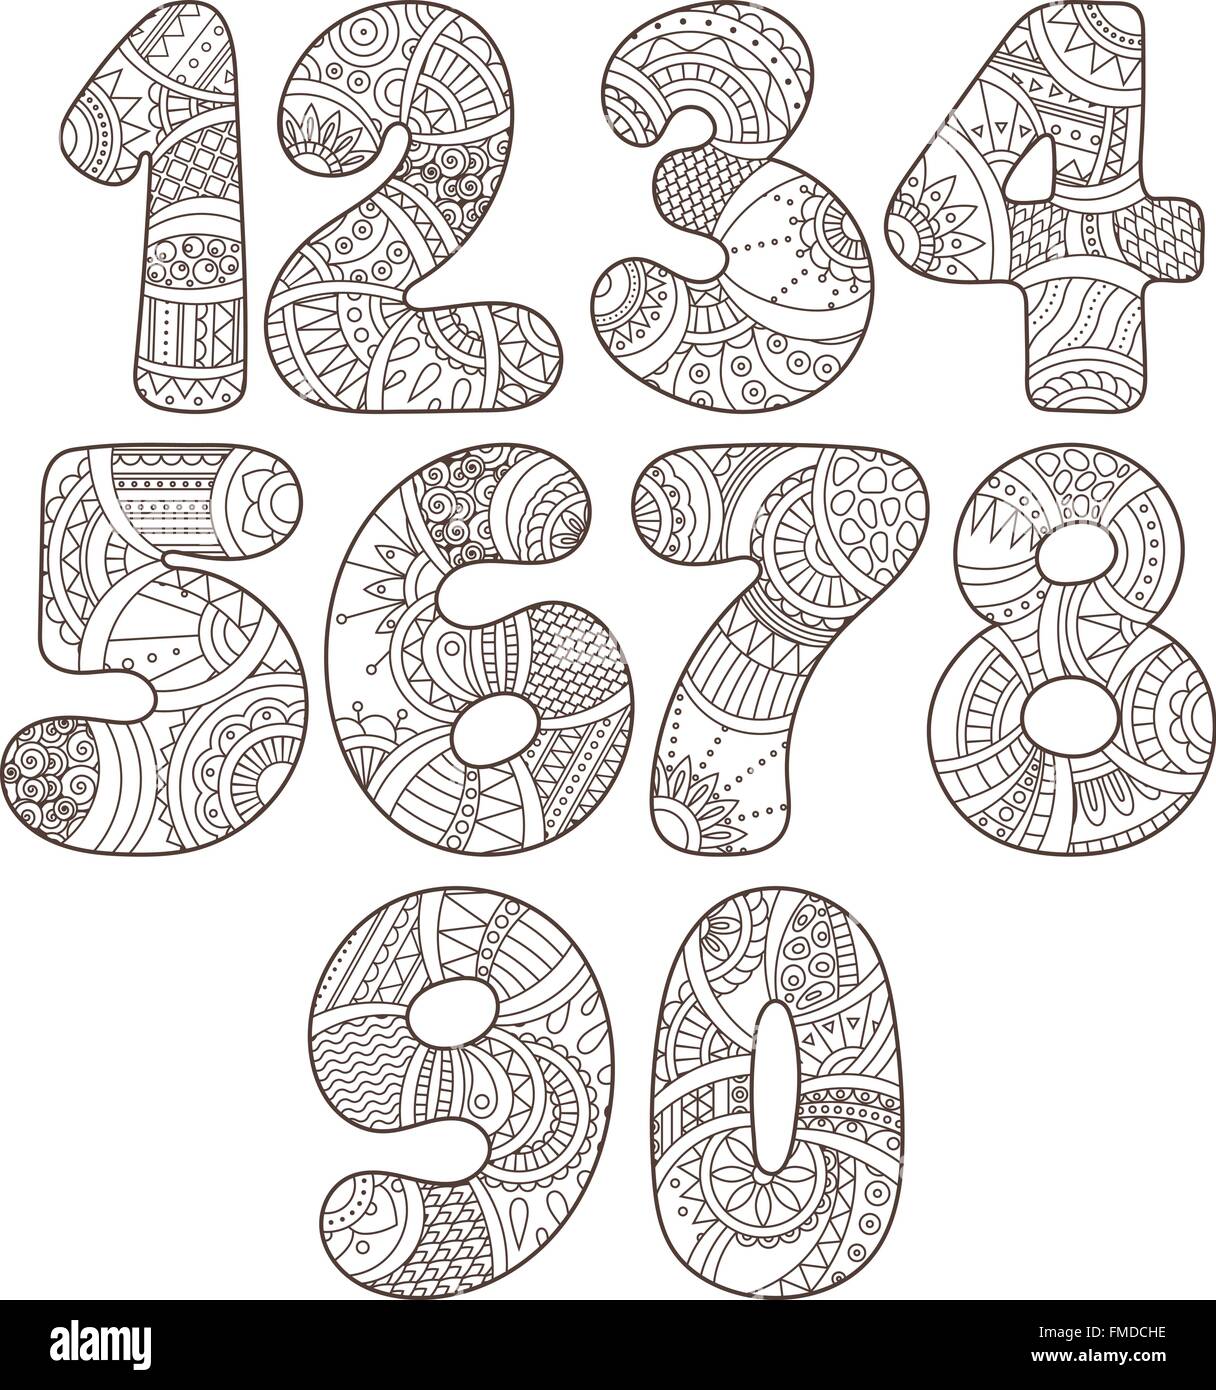 Download Zentangle numbers set. Collection of doodle numbers with ...